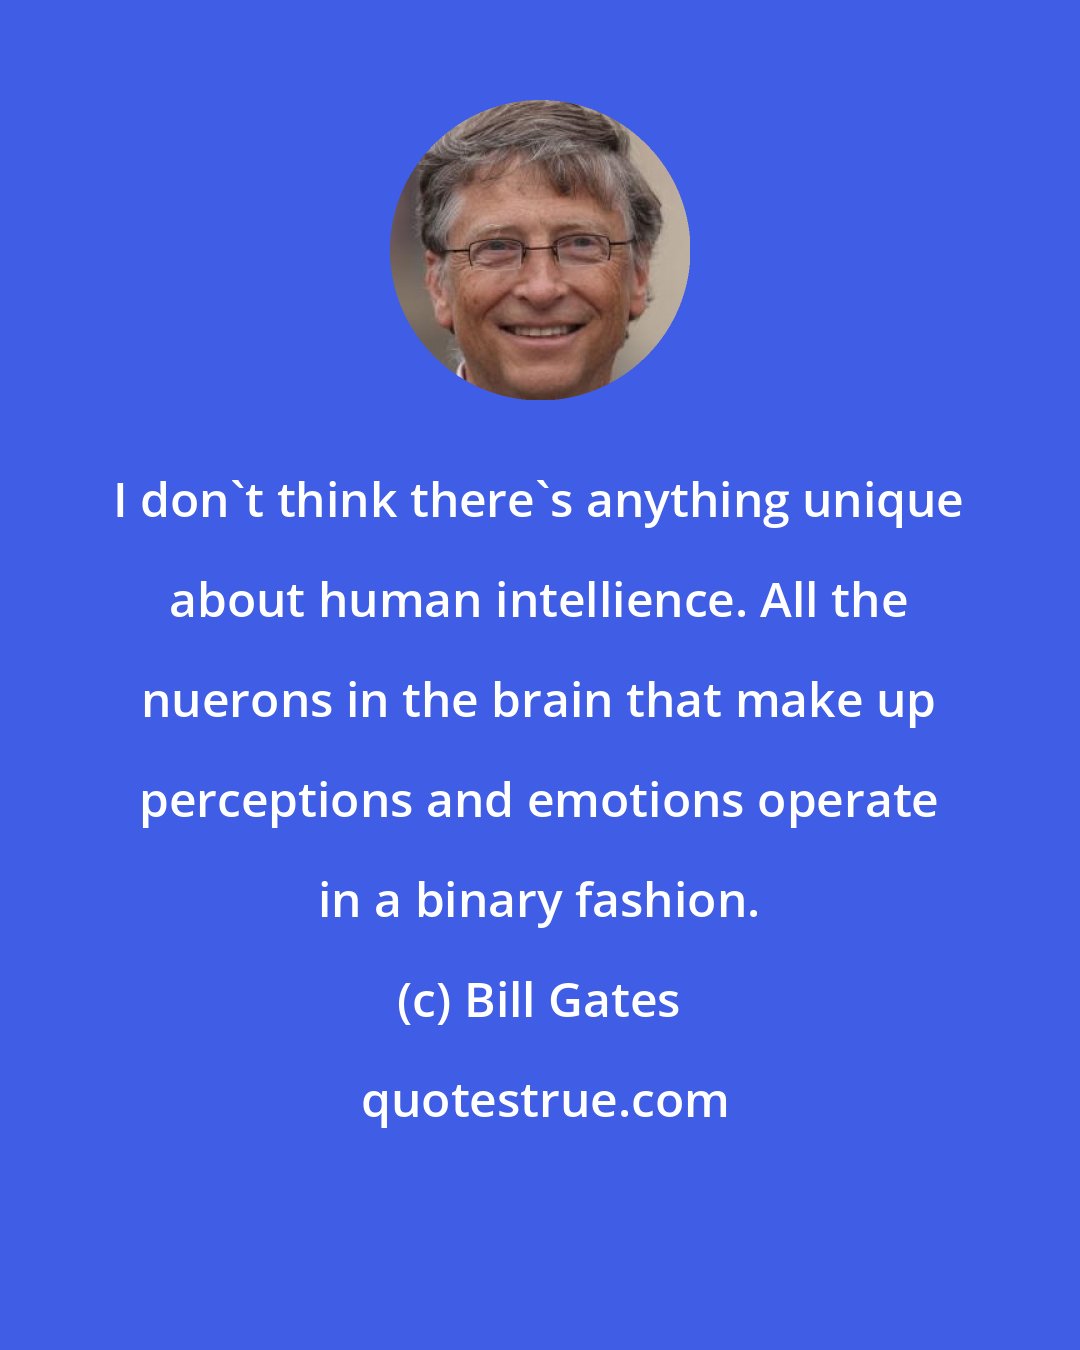 Bill Gates: I don't think there's anything unique about human intellience. All the nuerons in the brain that make up perceptions and emotions operate in a binary fashion.